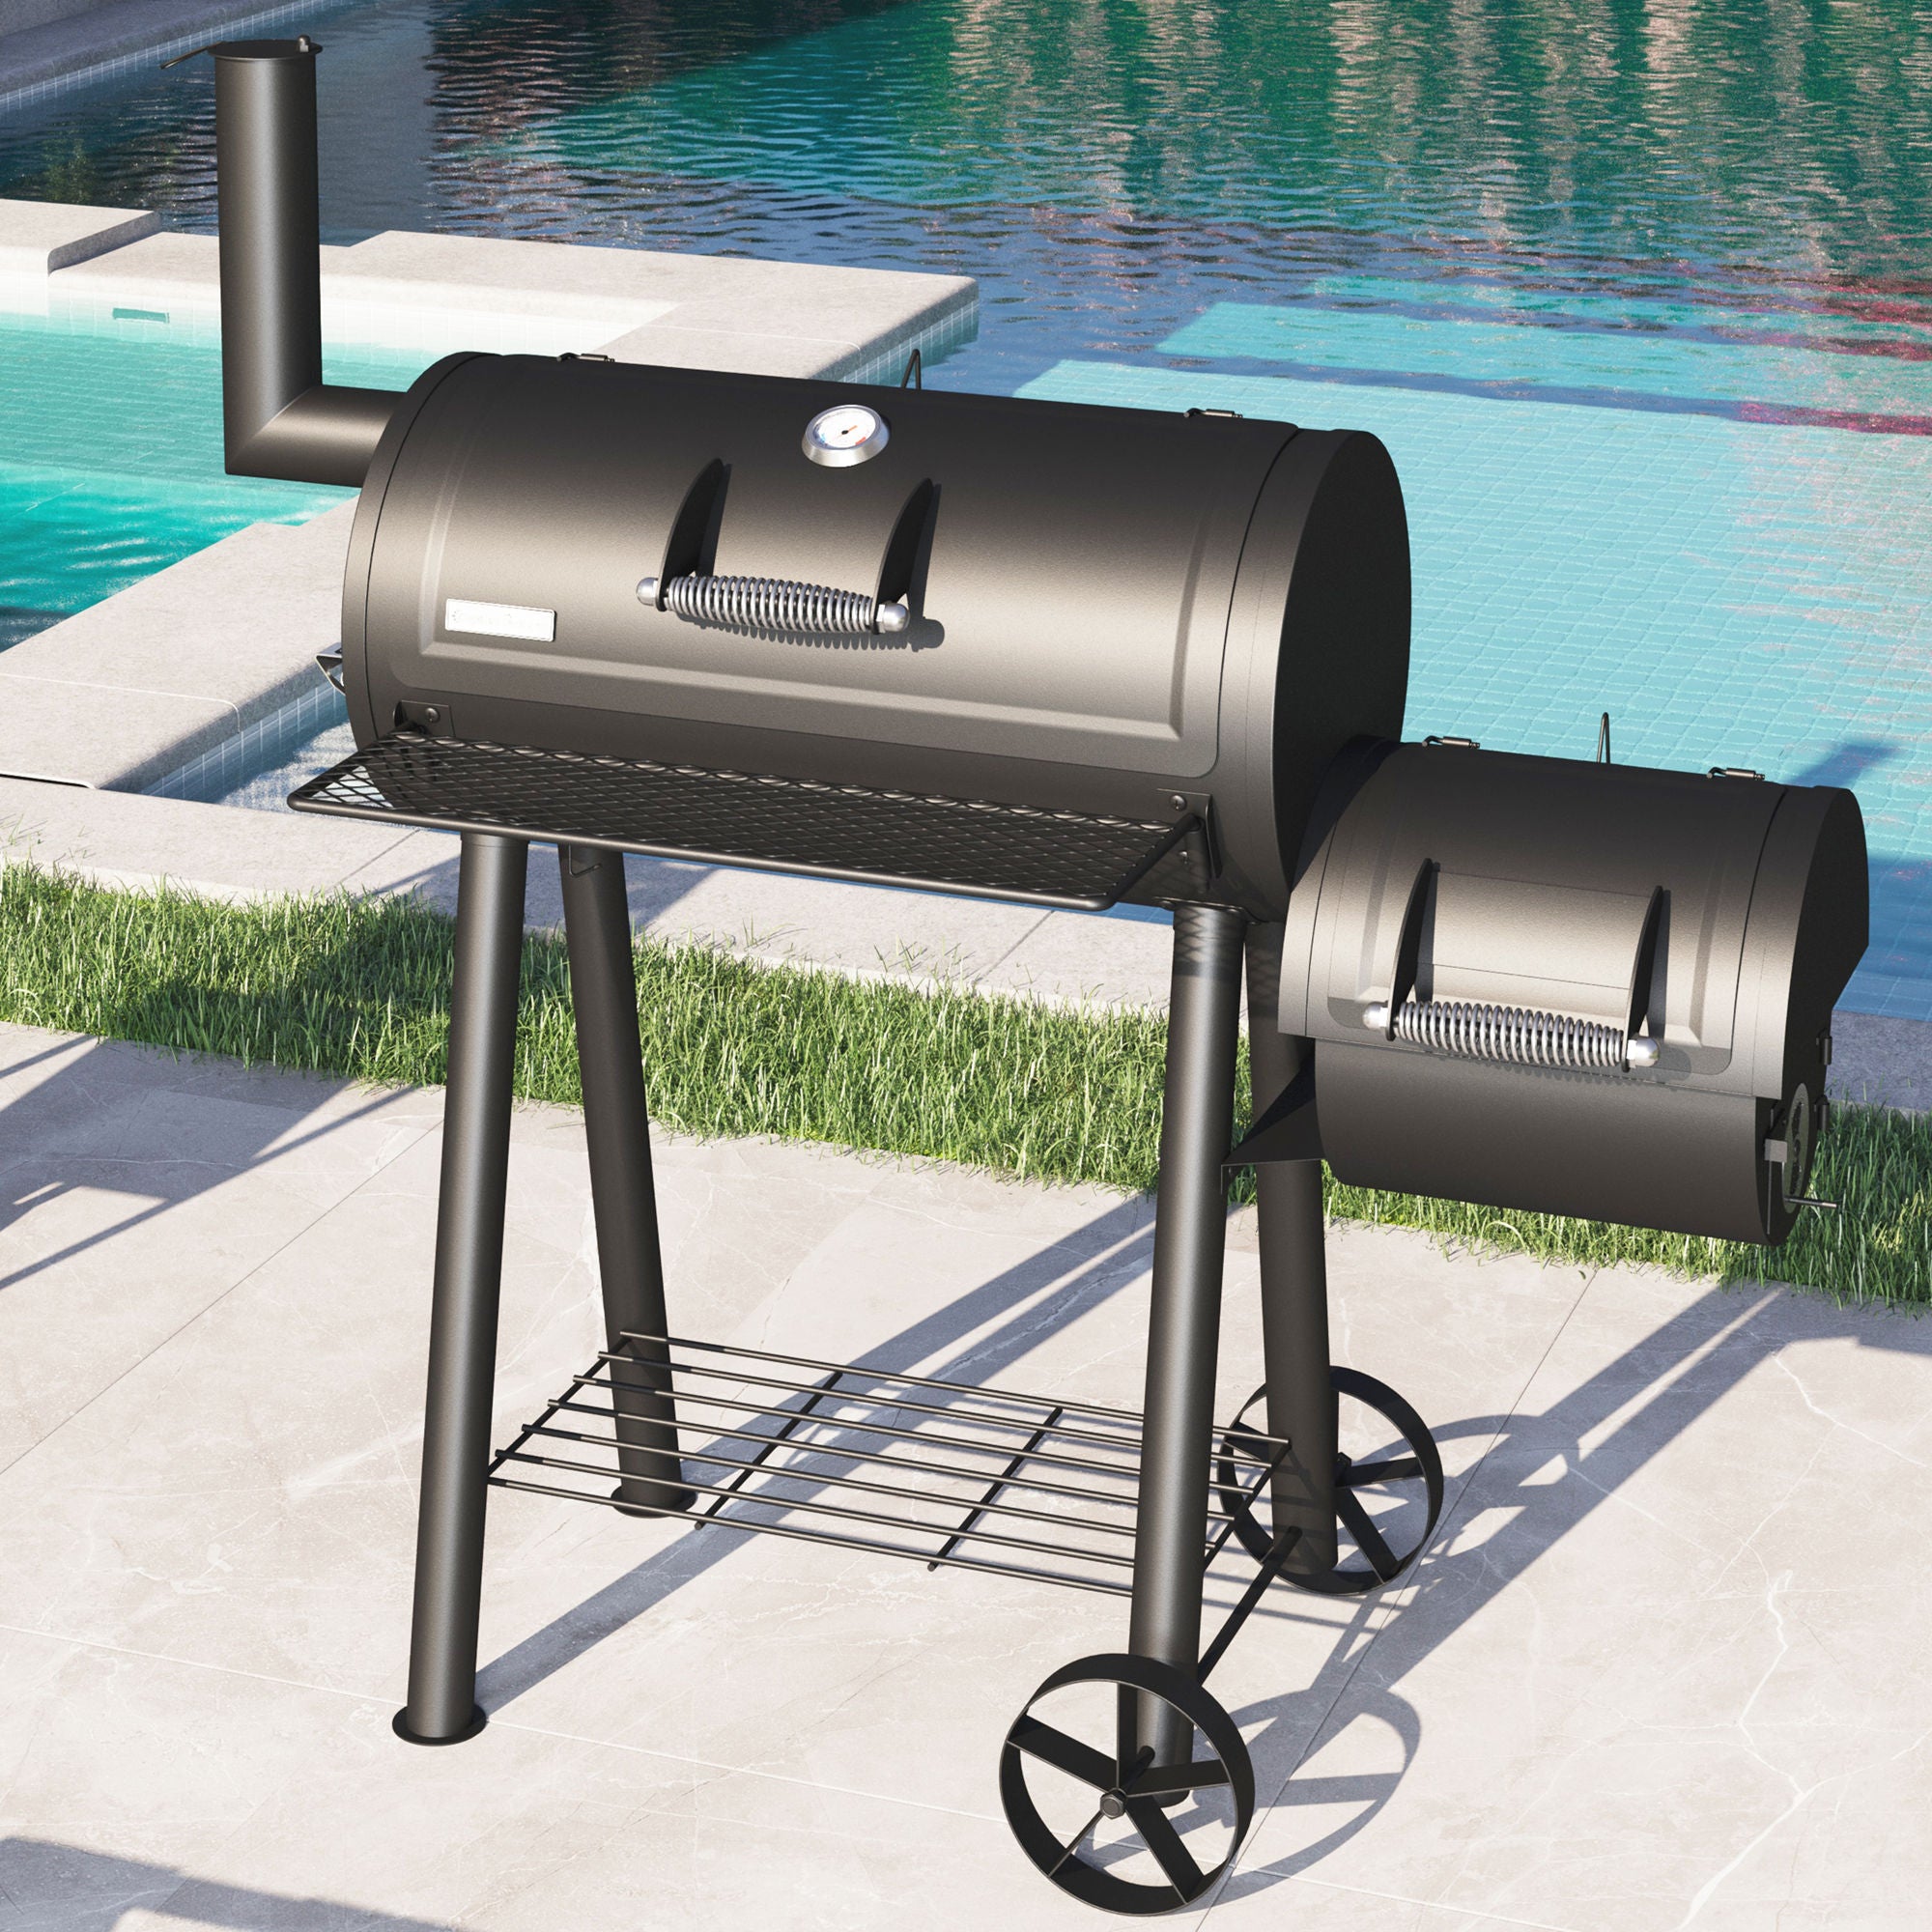 Sophia & William Portable BBQ Charcoal Grill with Offset Smoker, Black - image 1 of 10